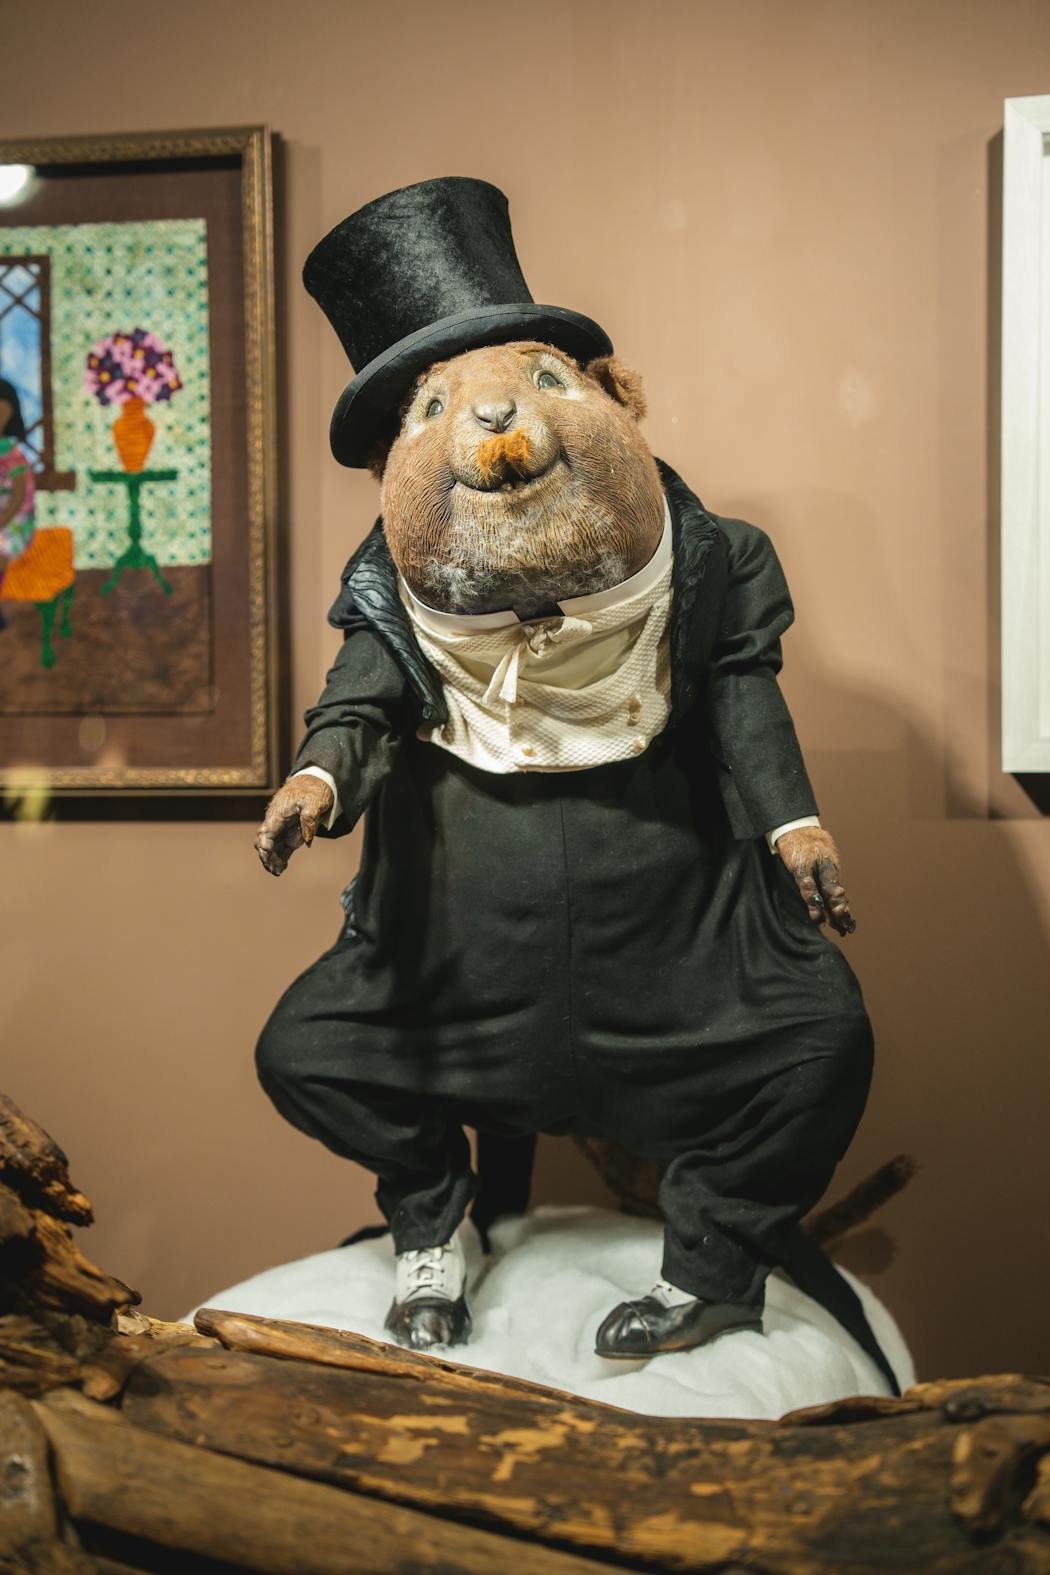 Mole from Dayton’s 1995 “The Wind in the Willows” display.